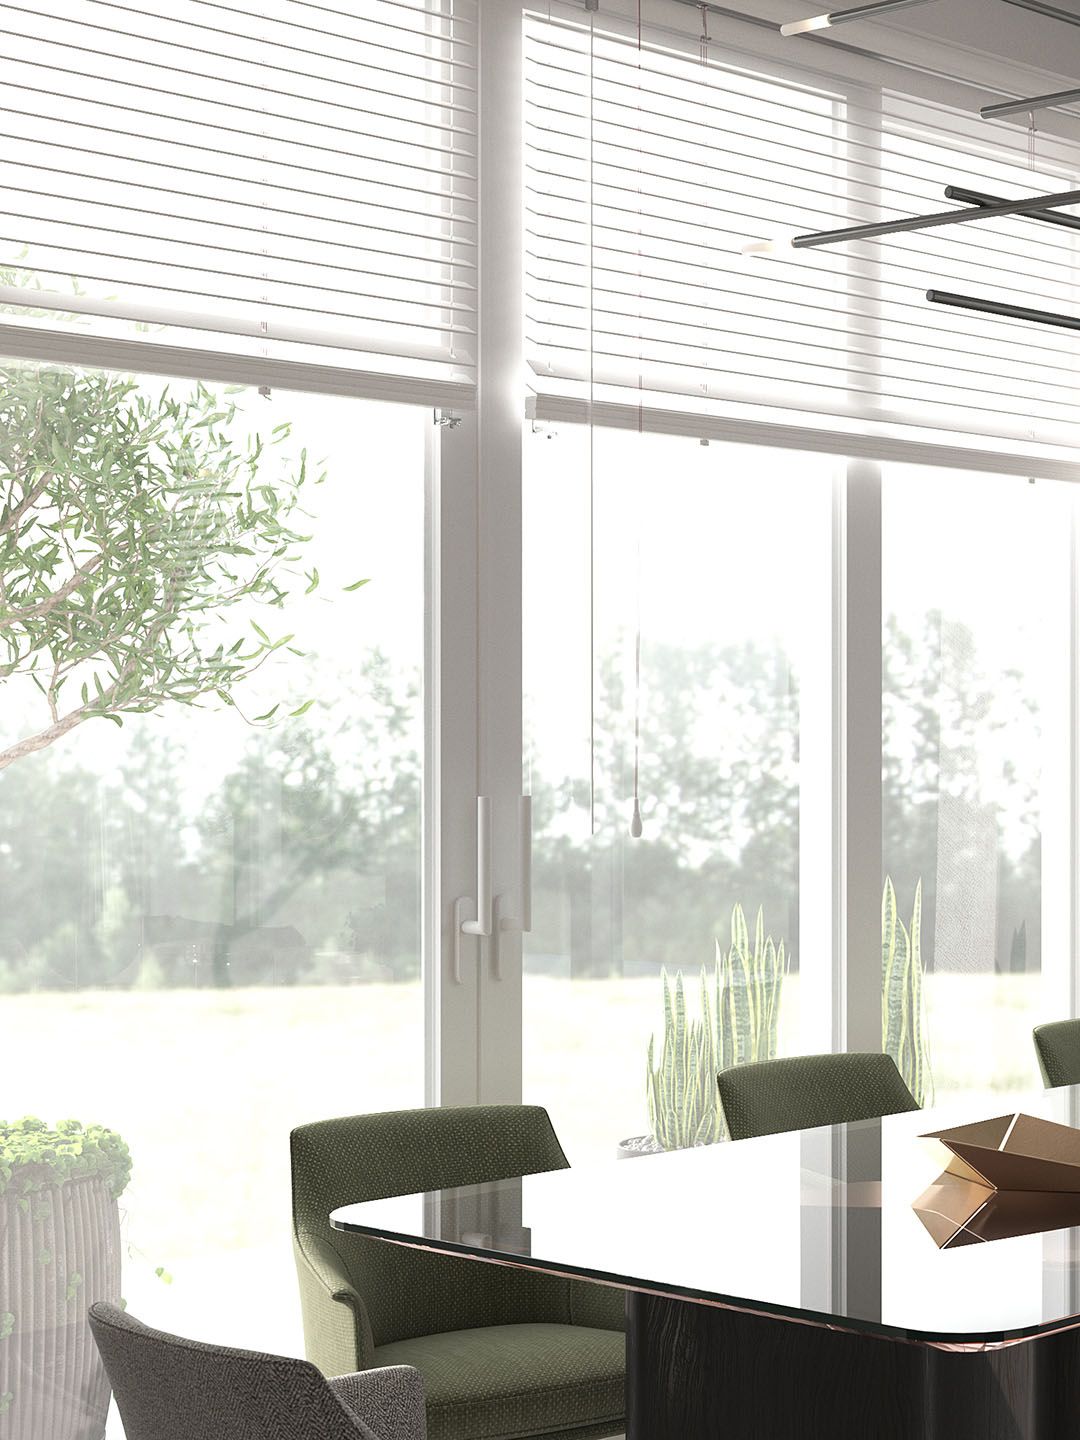 Venetian blinds in a dining area